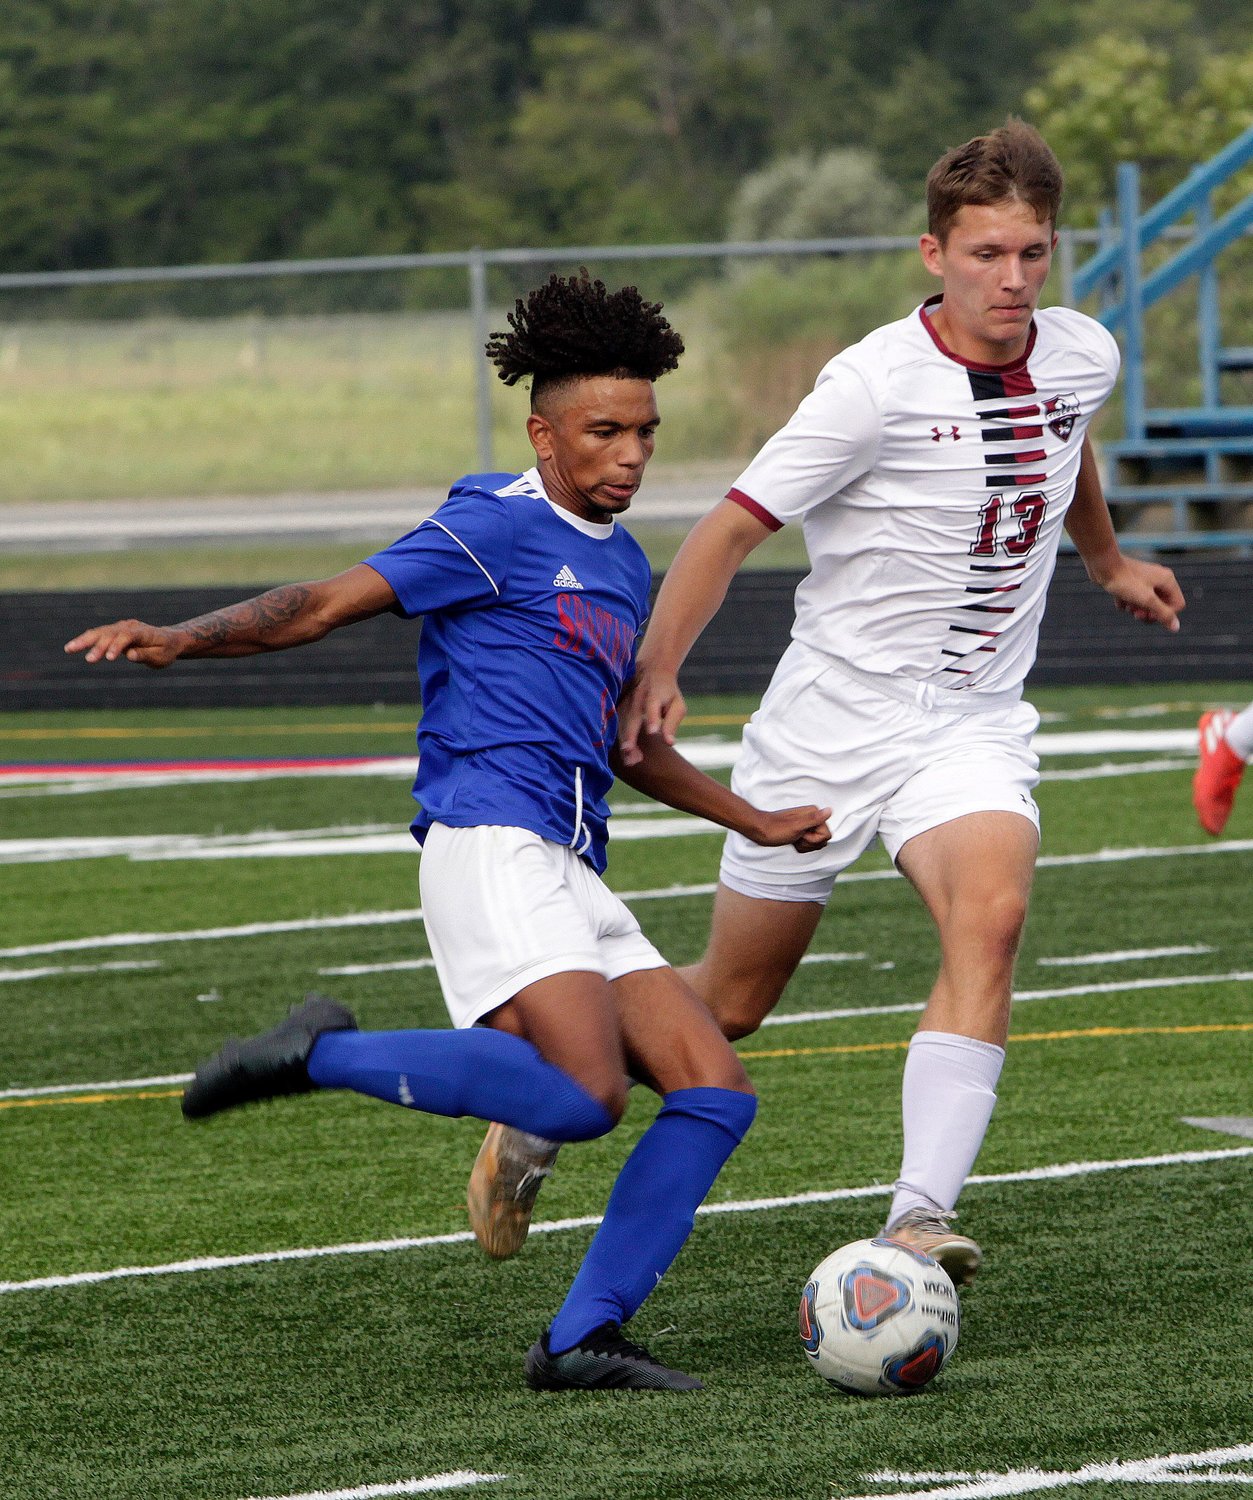 Moberly High School senior forward Charez Nichols sends the soccer ball upfield to a teammate Tuesday during the Spartans 8-1 home victory against Canton. Nichols netted three goals and had two assists for the cause.